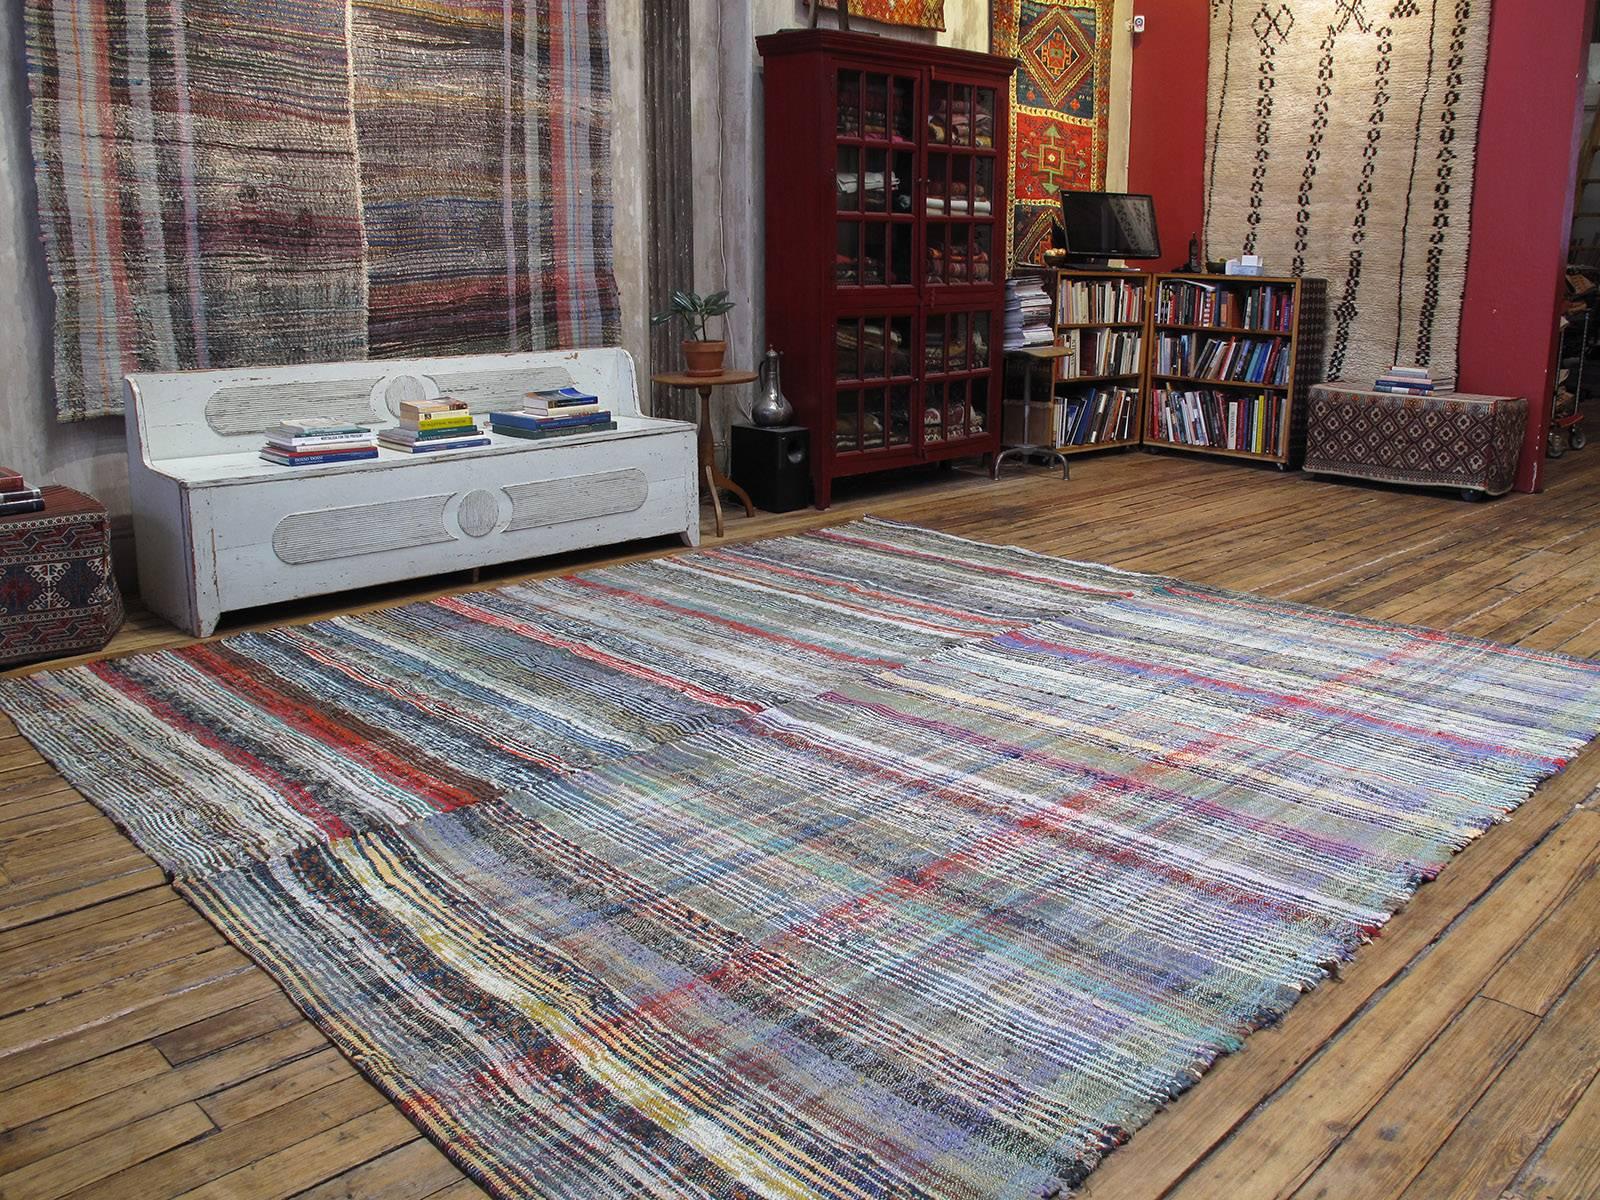 An old flat-weave from Central Turkey, woven with a mixture of colorful cotton rag, used as a sturdy, everyday floor cover in the weaver's household. Great modern appeal with its harmonious color palette and simple authenticity. This is a